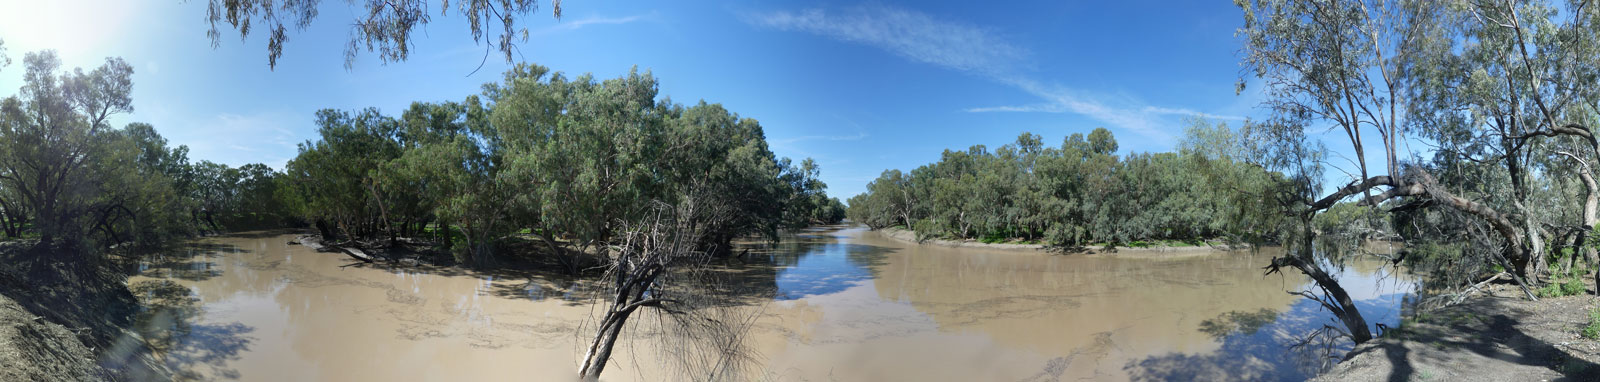 Merging of the Culgoa and Barwon to form the Darling river